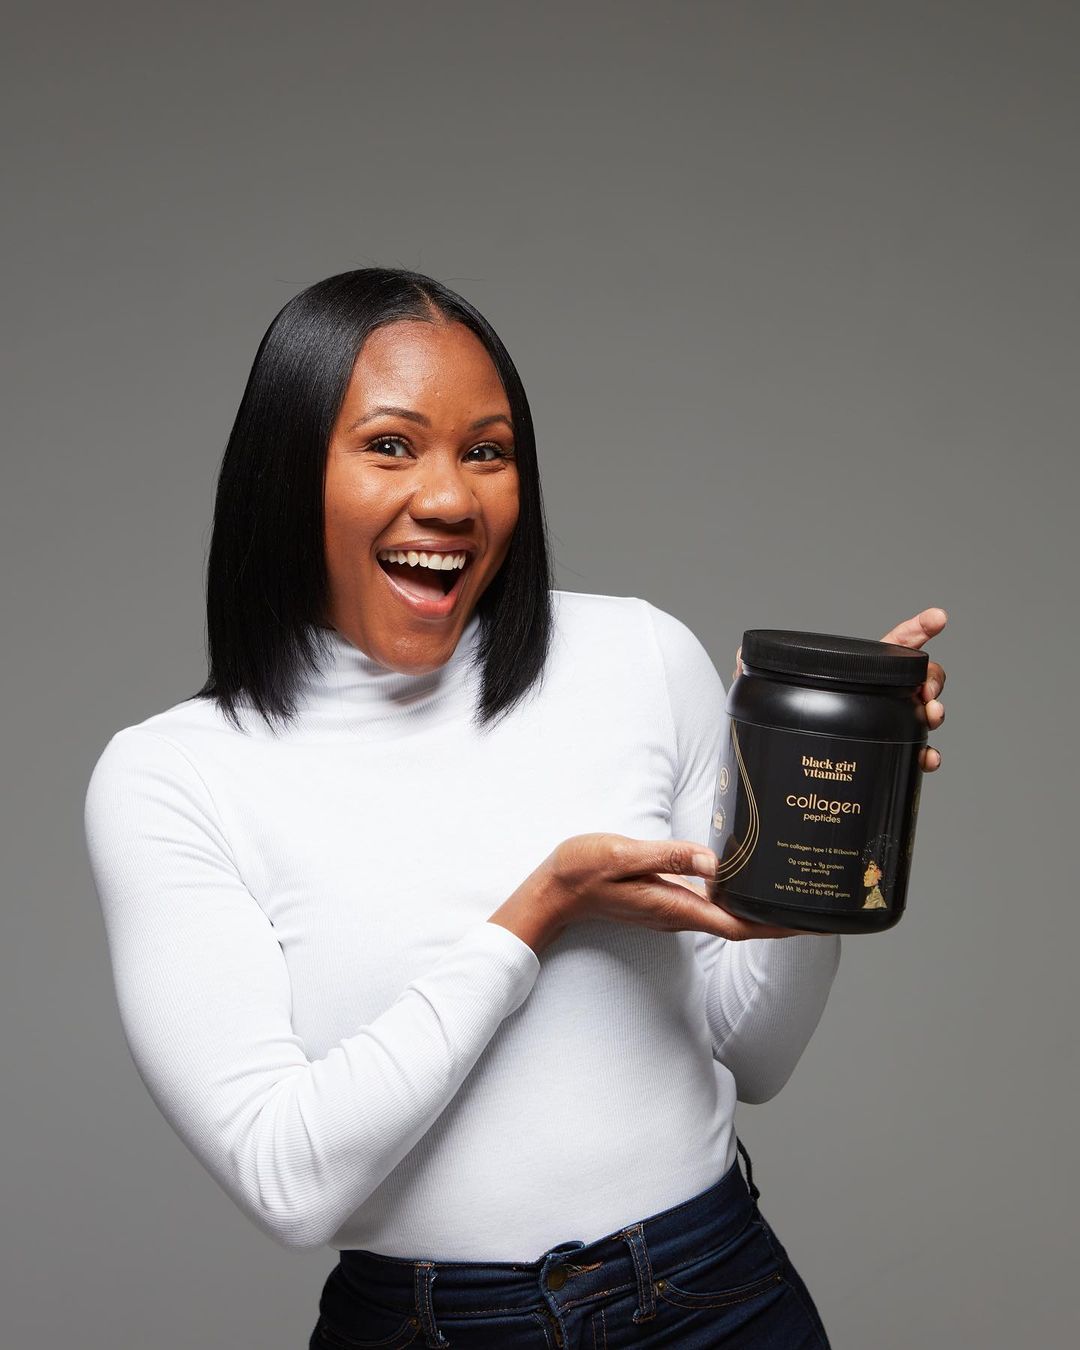 Black-owned health and wellness brands